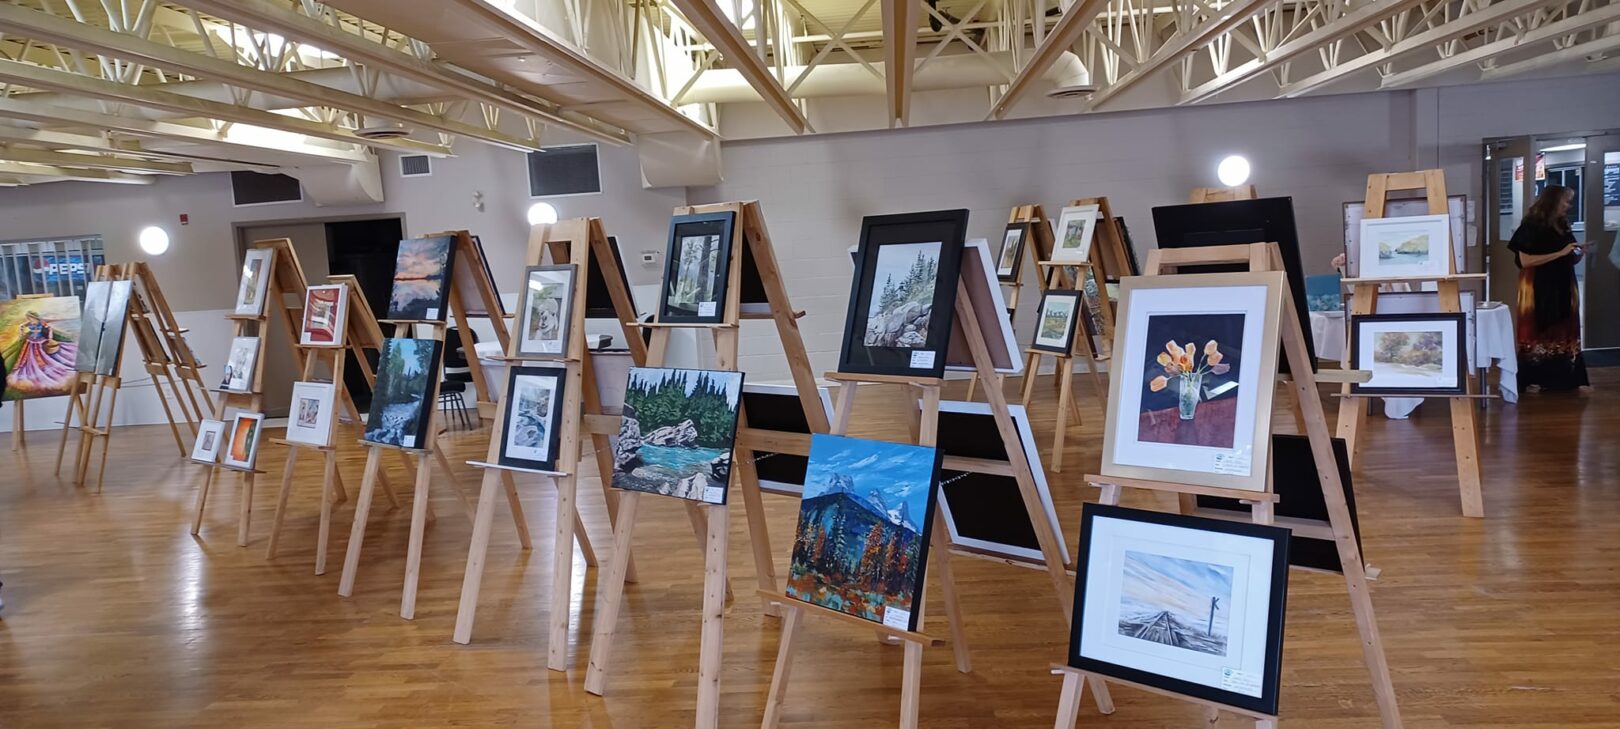 Community supports local artists in spring art show and sale